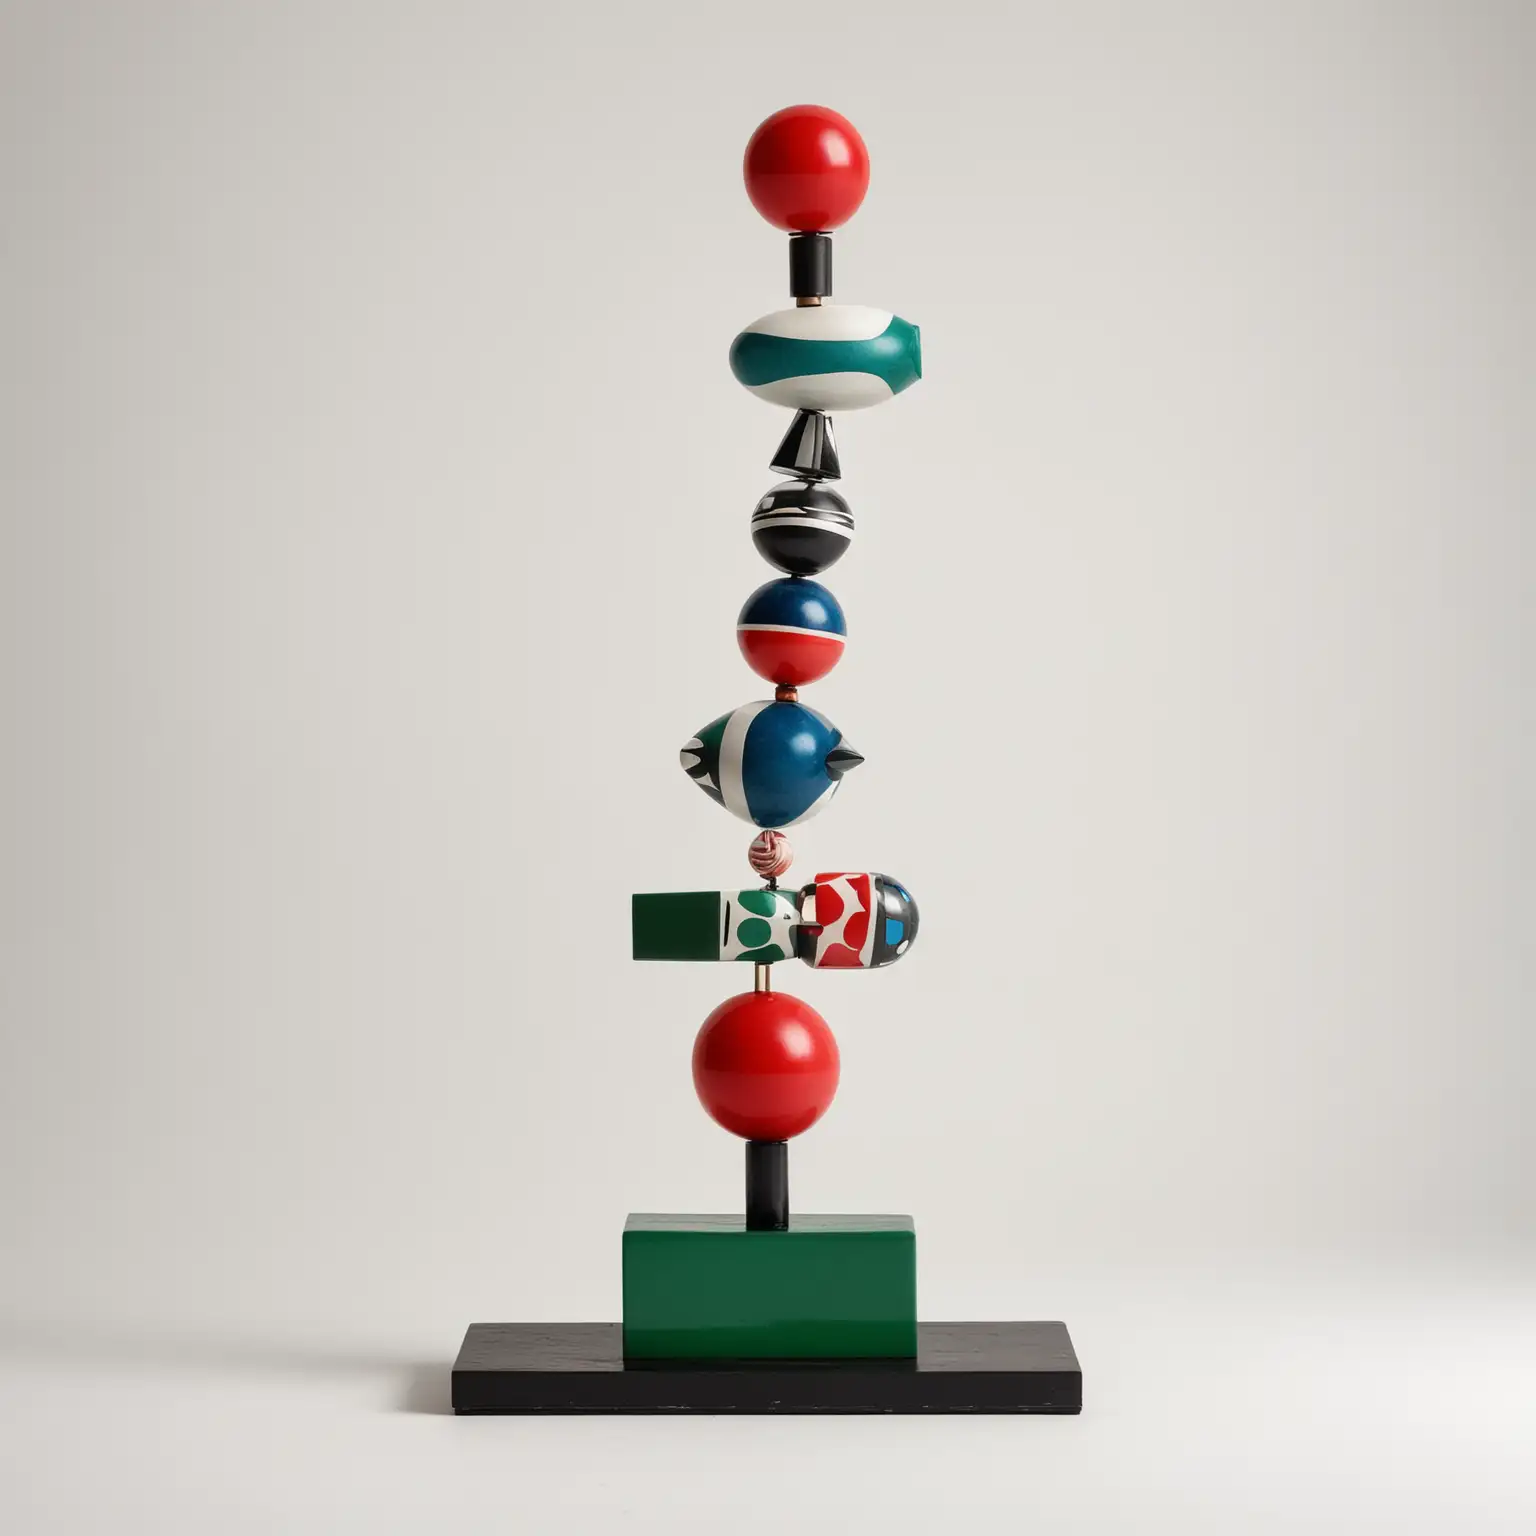 Abstract Minimalist Totem Balance Sculpture Circus Inspired Green Red Black White and Blue Design